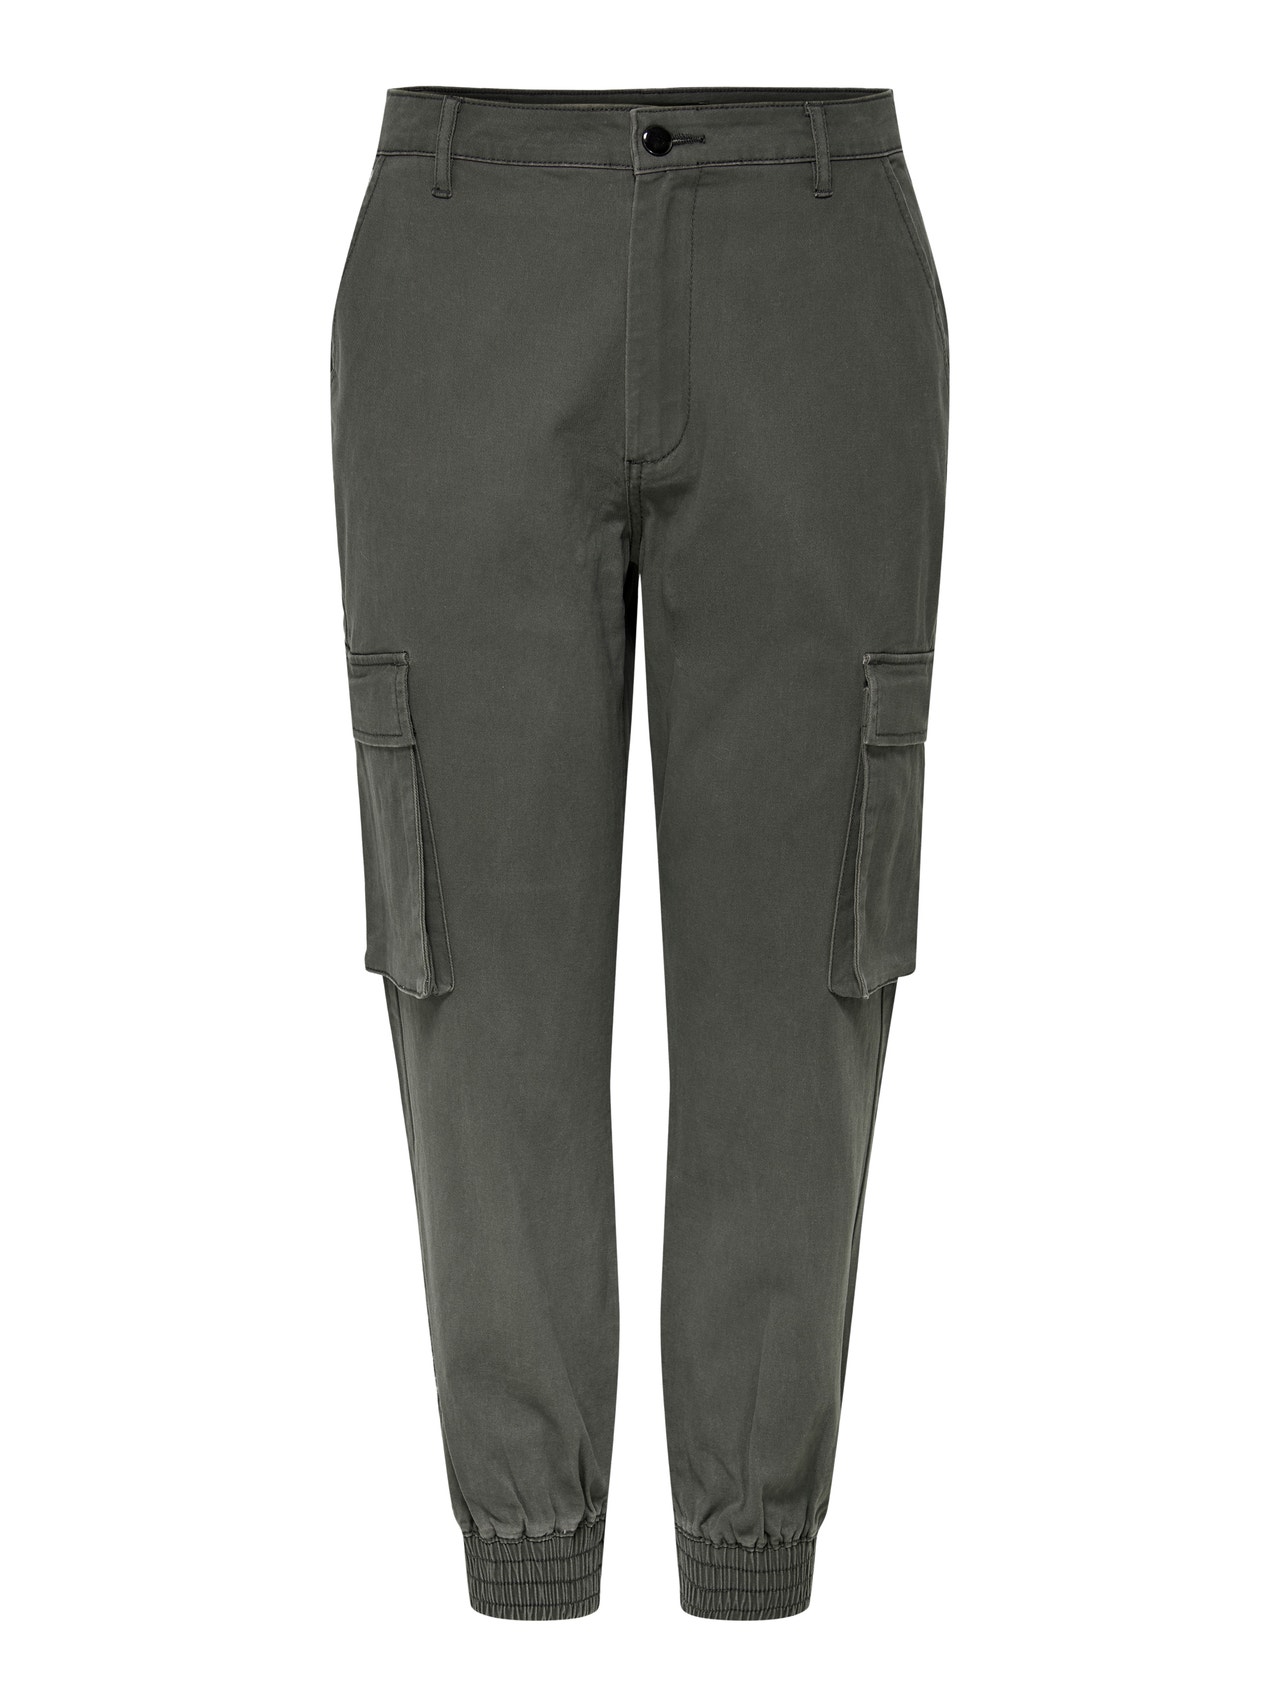 ONLY Pantalons Comfort Fit Taille moyenne -Beluga - 15187743